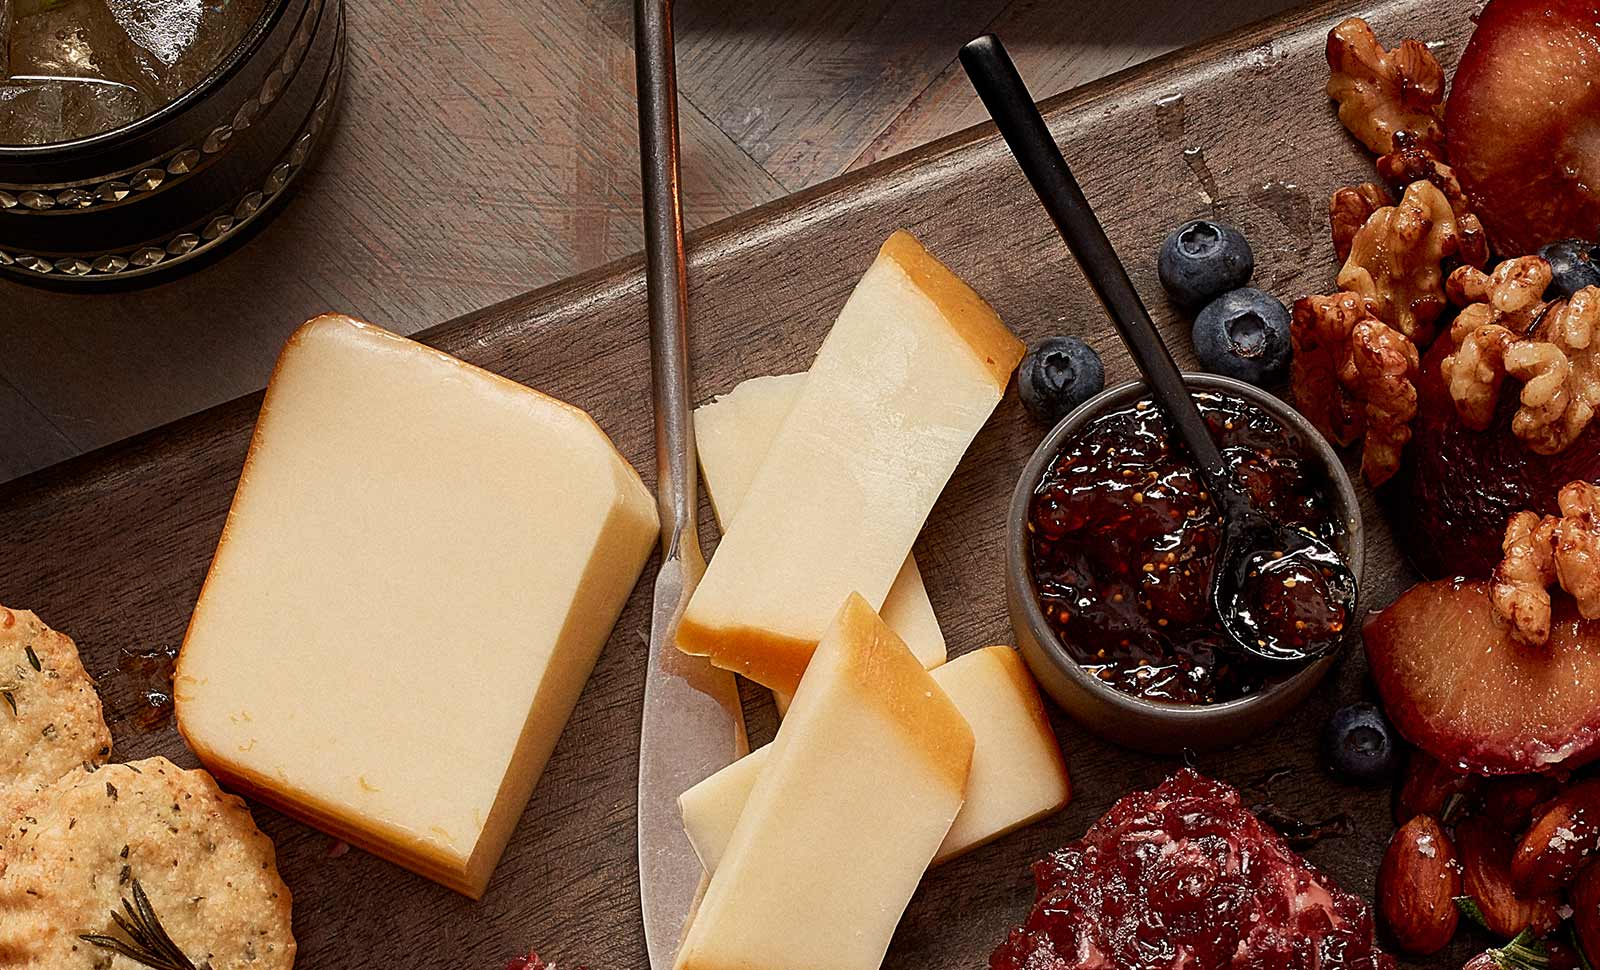 Naturally smoked Monterey jack cheese served with jam, blueberries and walnuts.